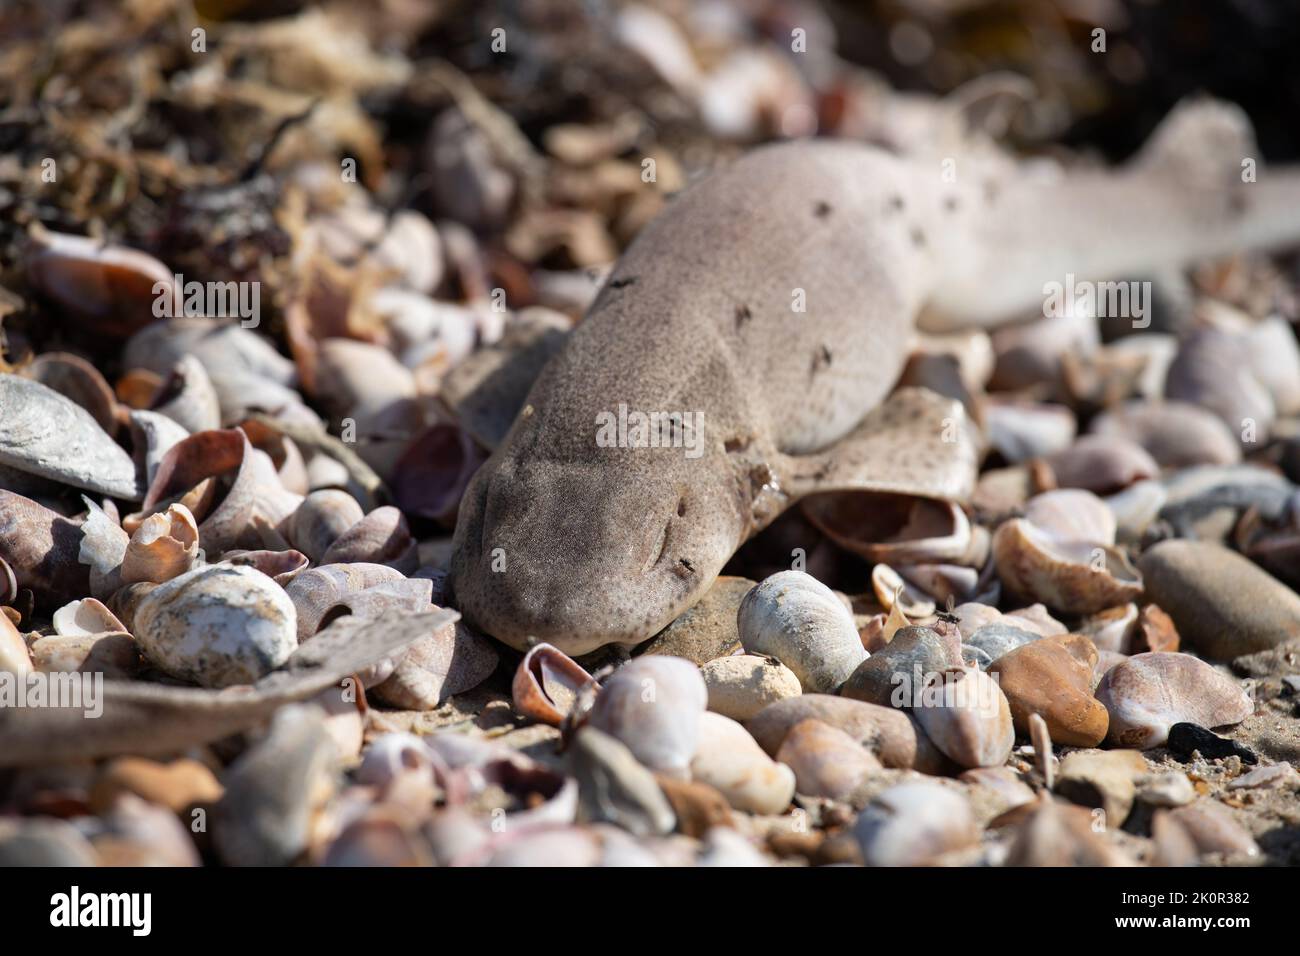 Dead dogfish wash up on Littlehampton beaches at low tide after storms at sea Stock Photo